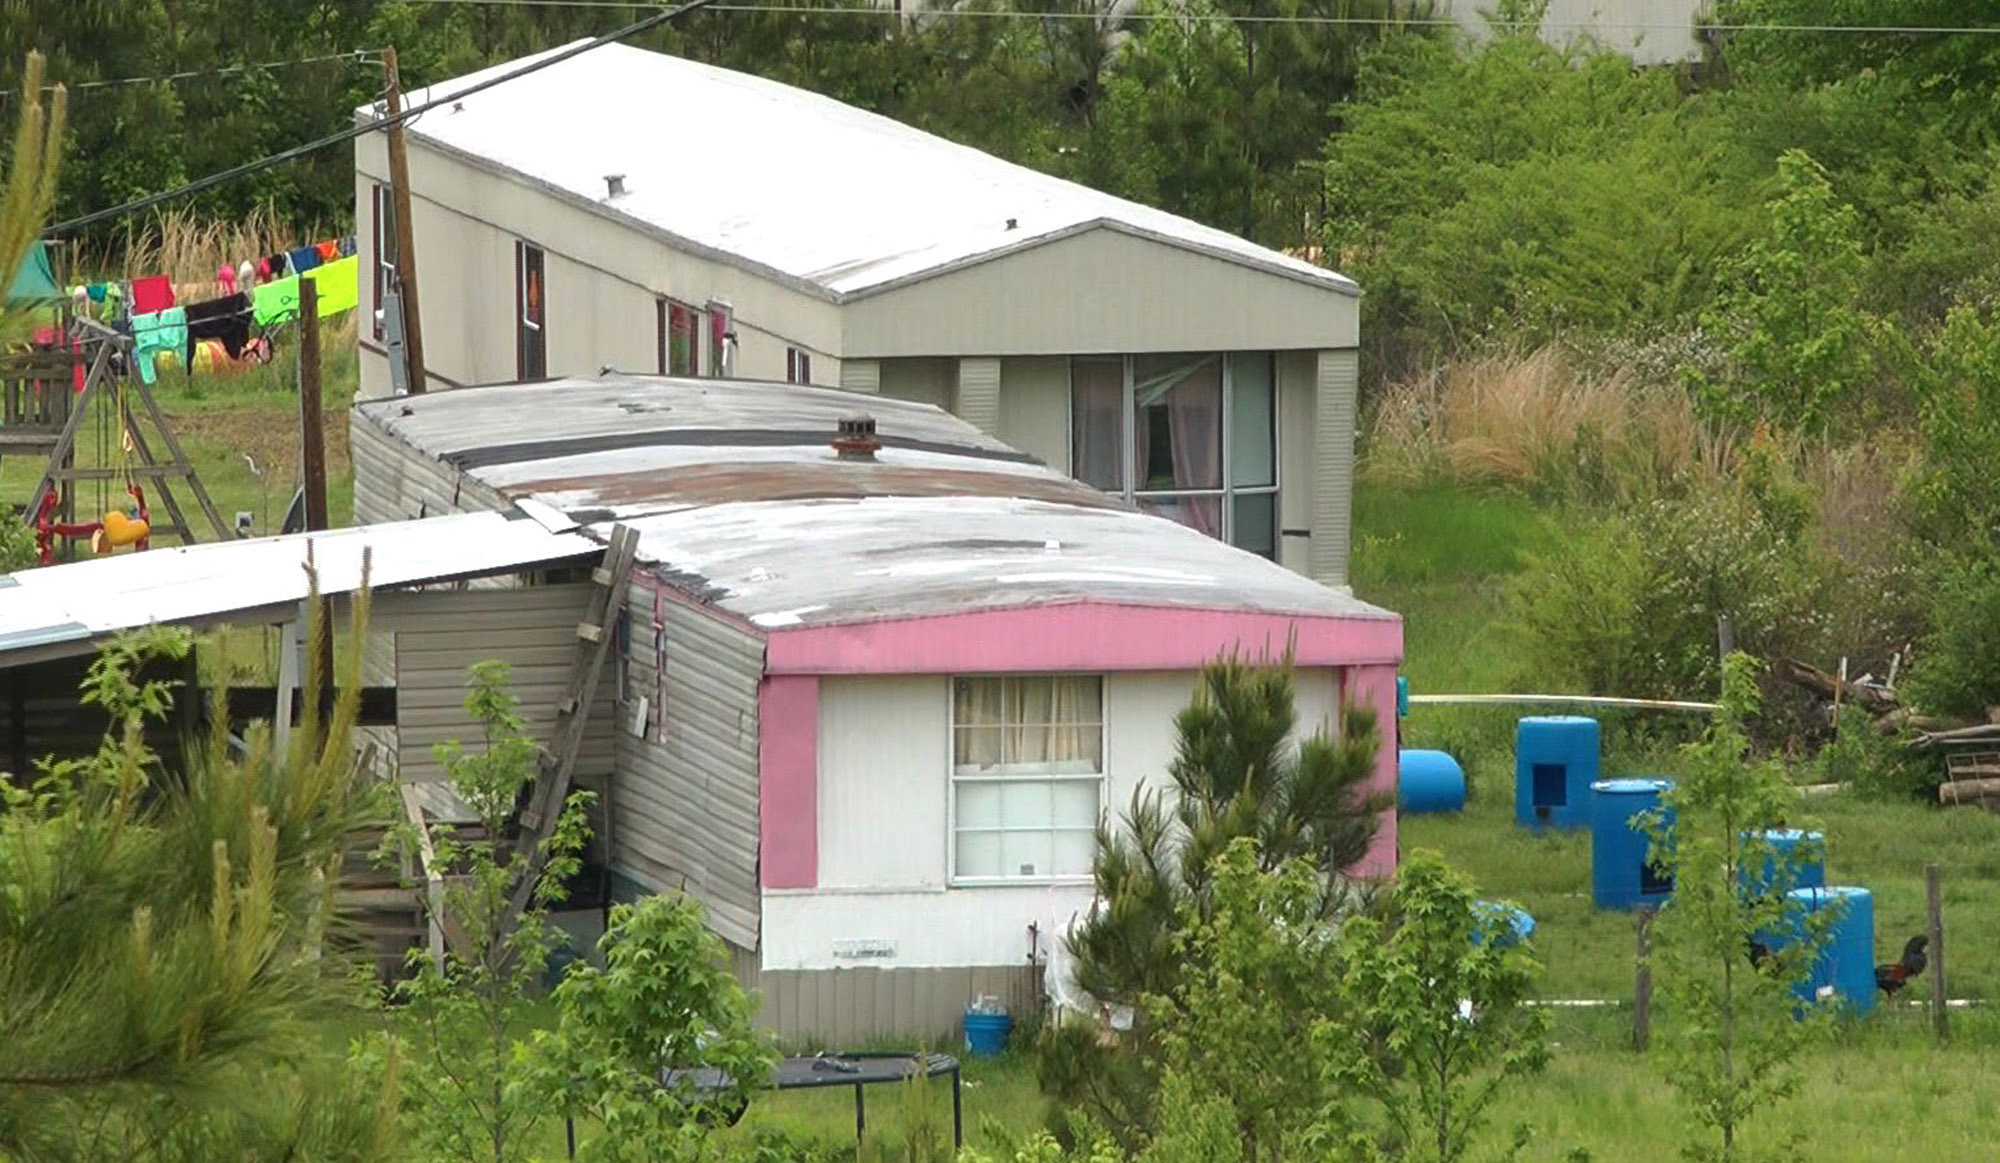 Mobile homes dot the landscape in Kilpatrick, Ala., in this May 15 image from video.